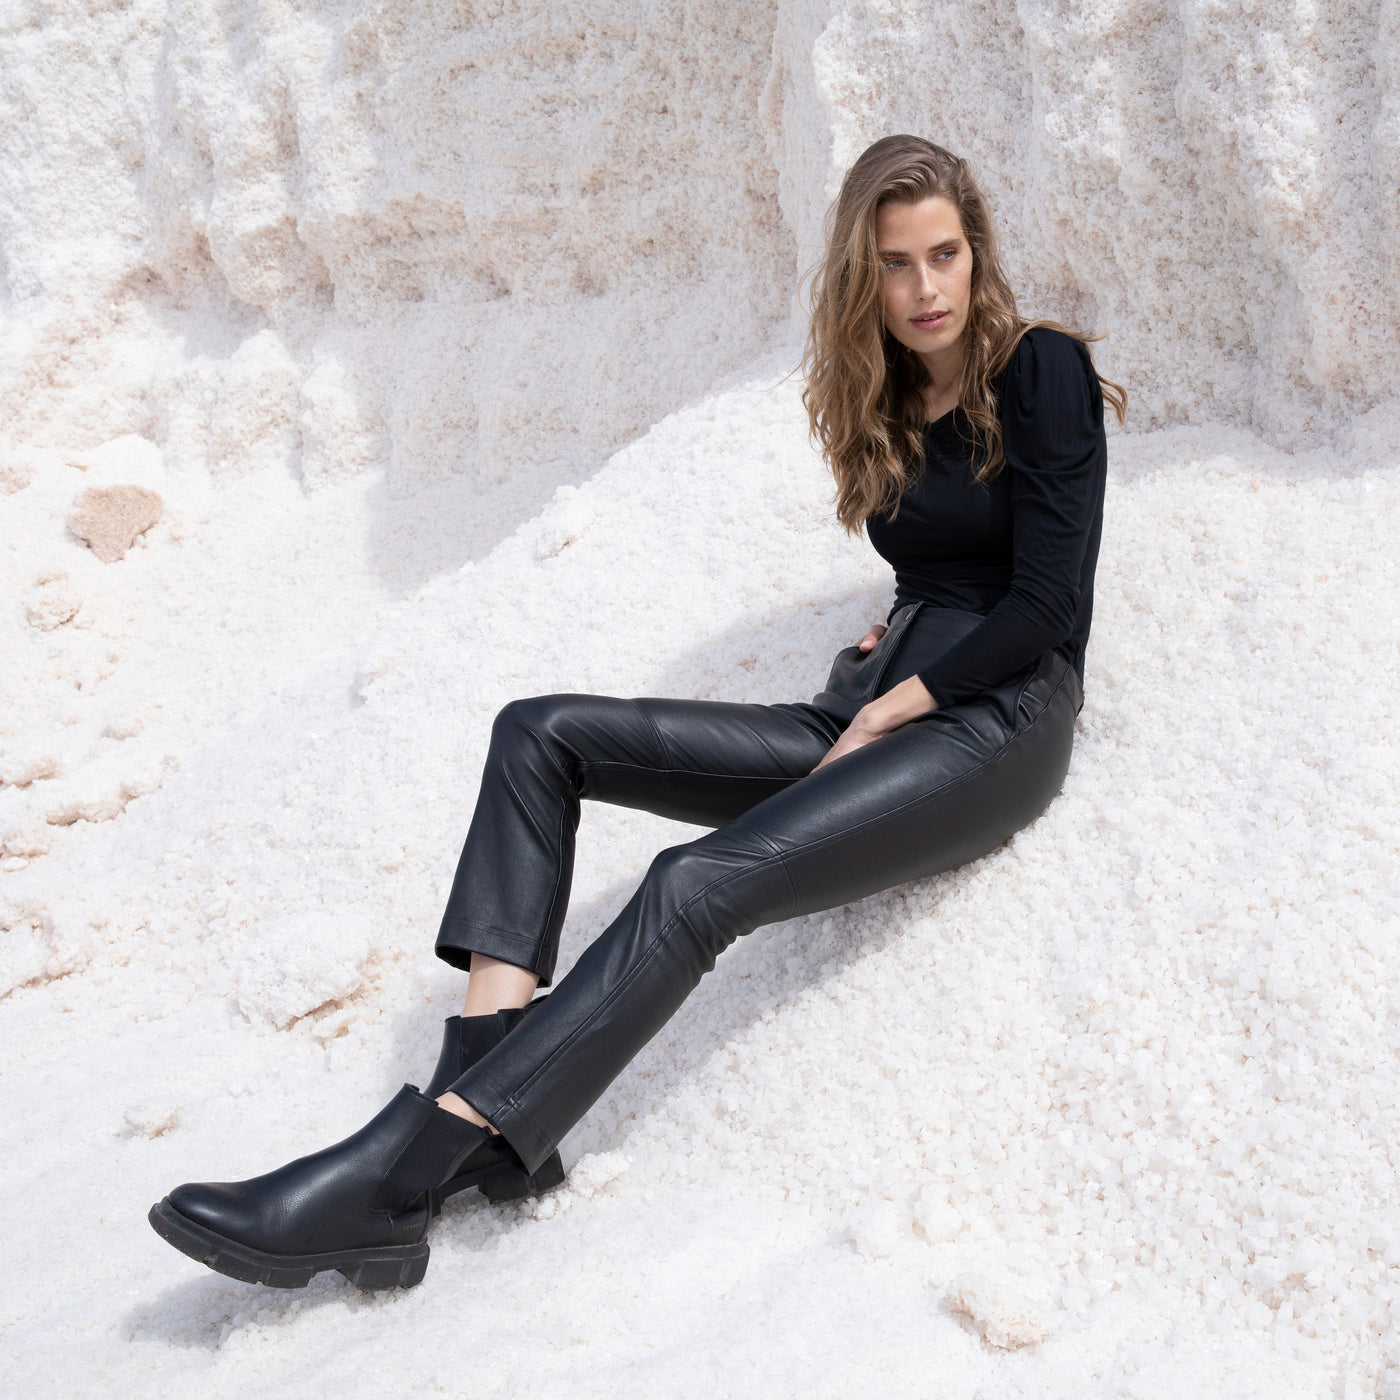 Liapure Atelier - Leather Cropped Pants